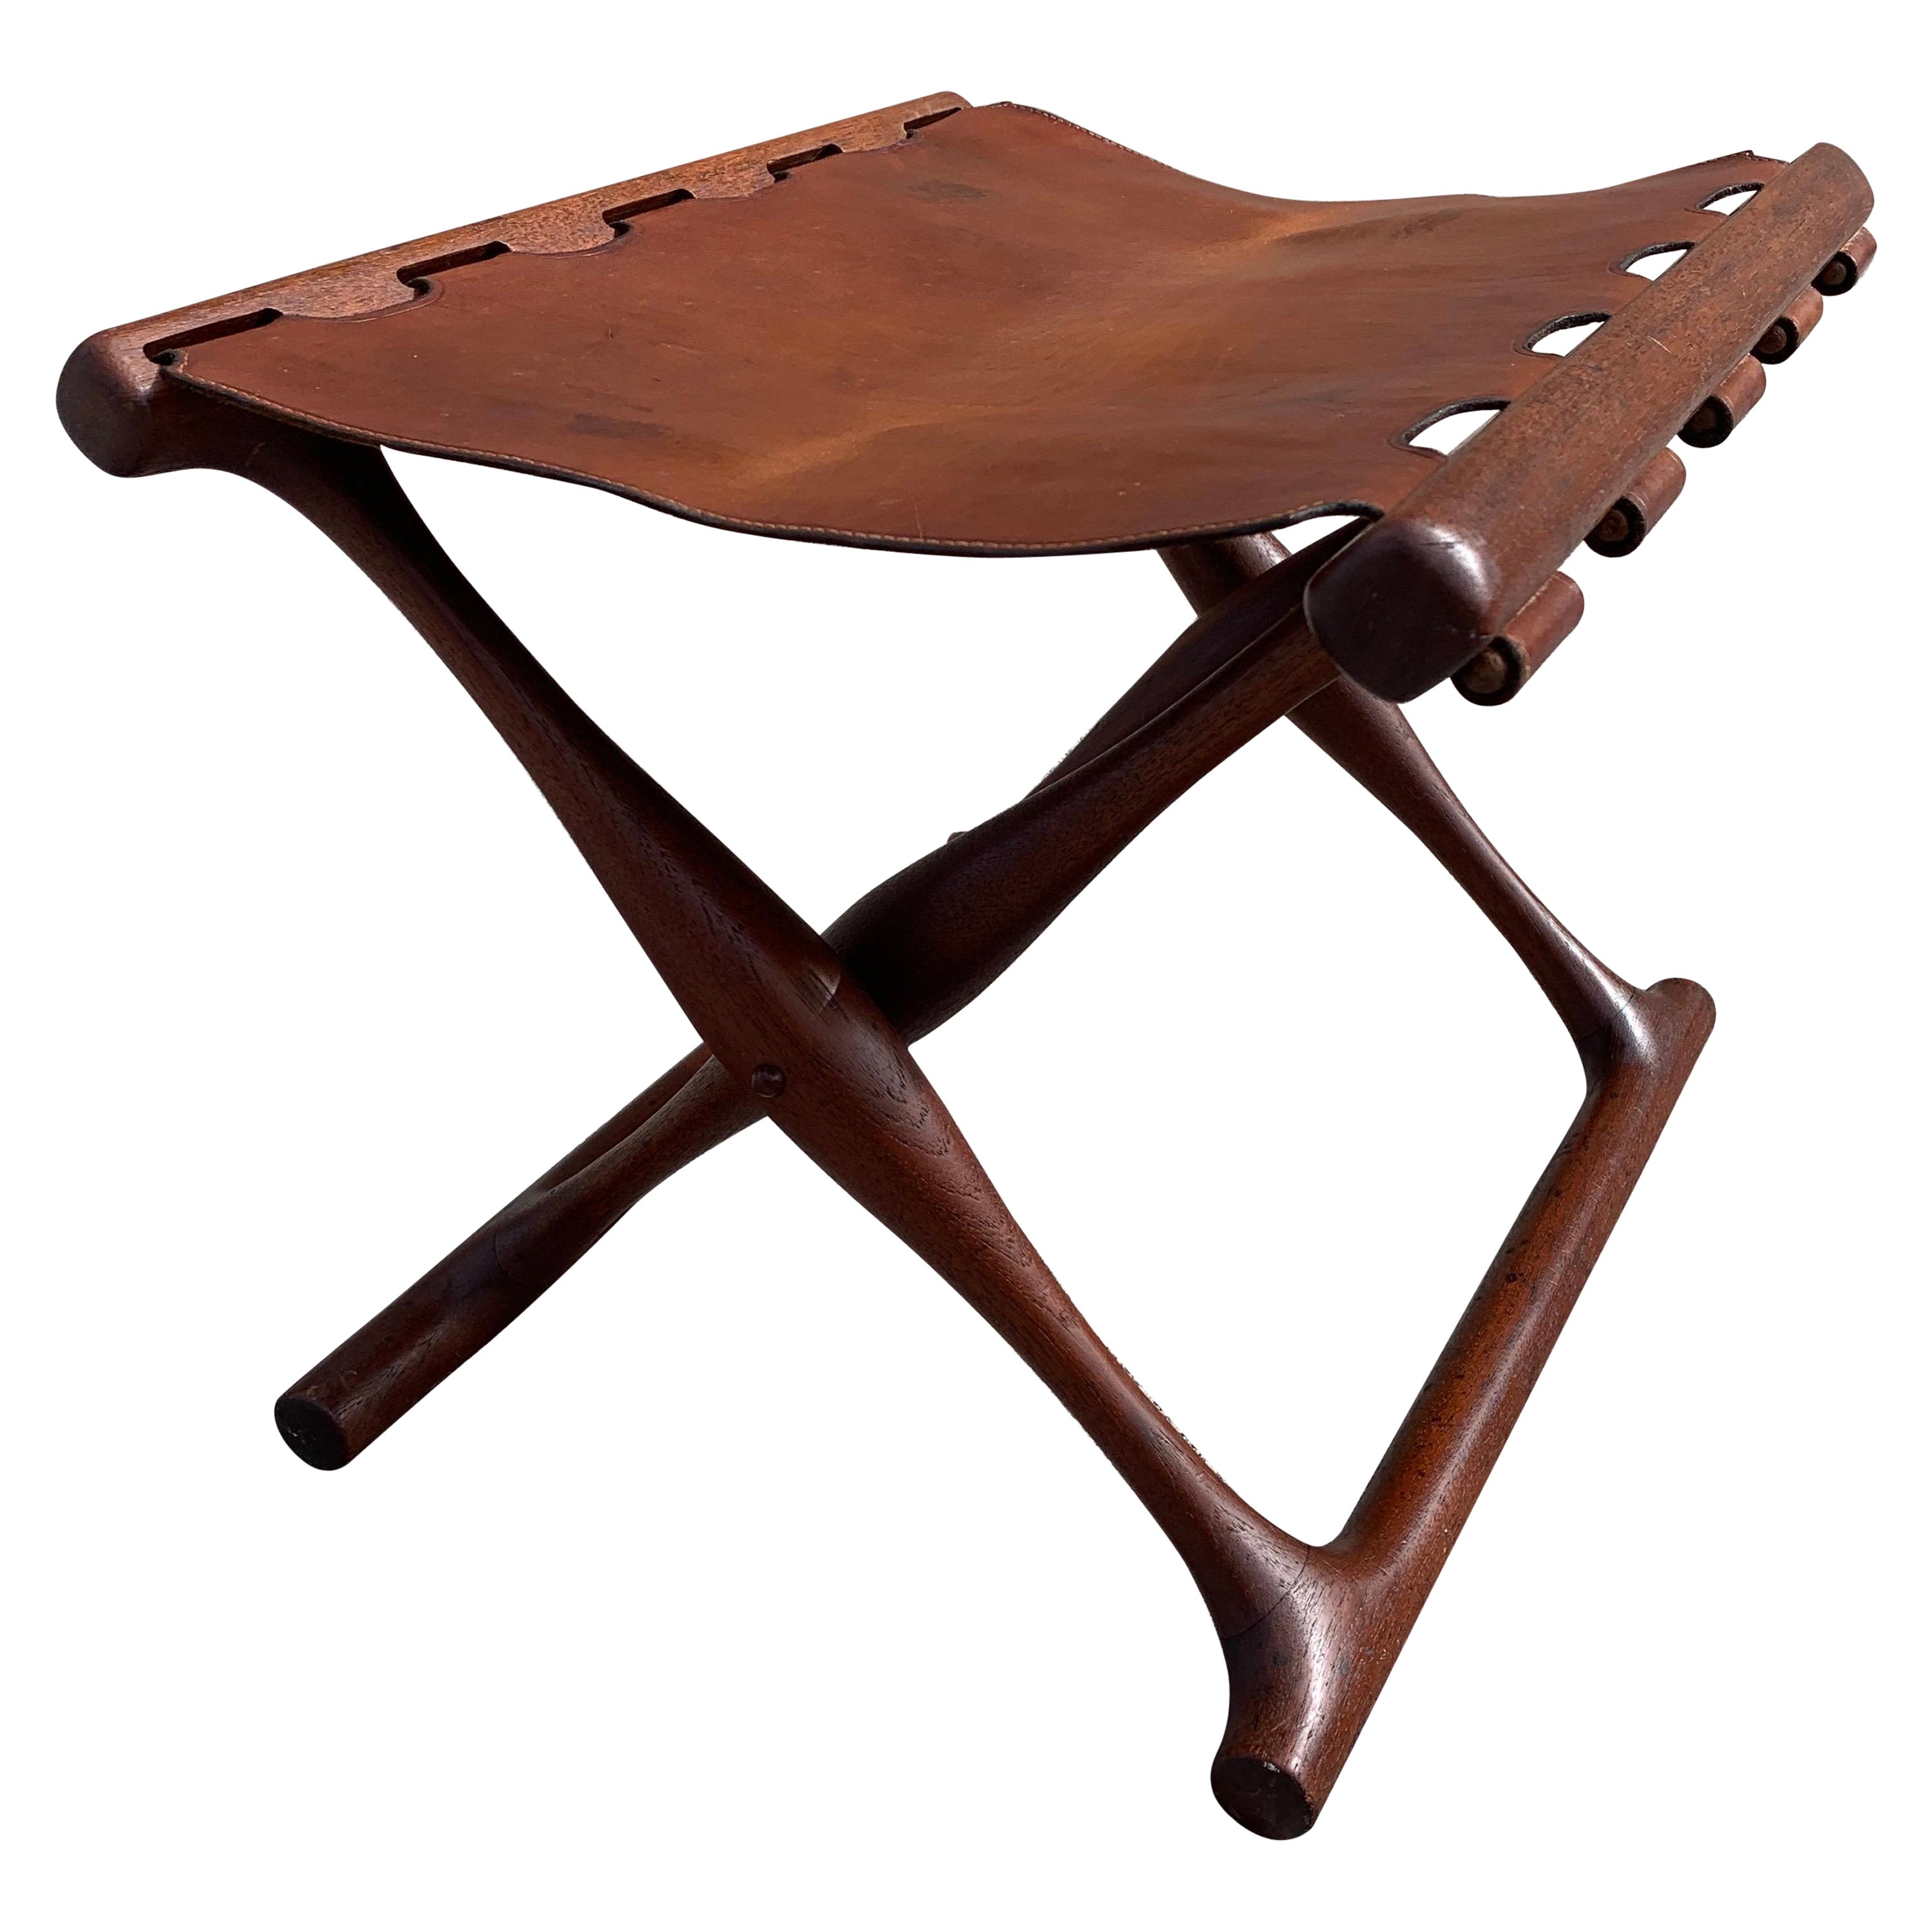 Poul Hundevad Folding Stool in Brown Leather and Teak